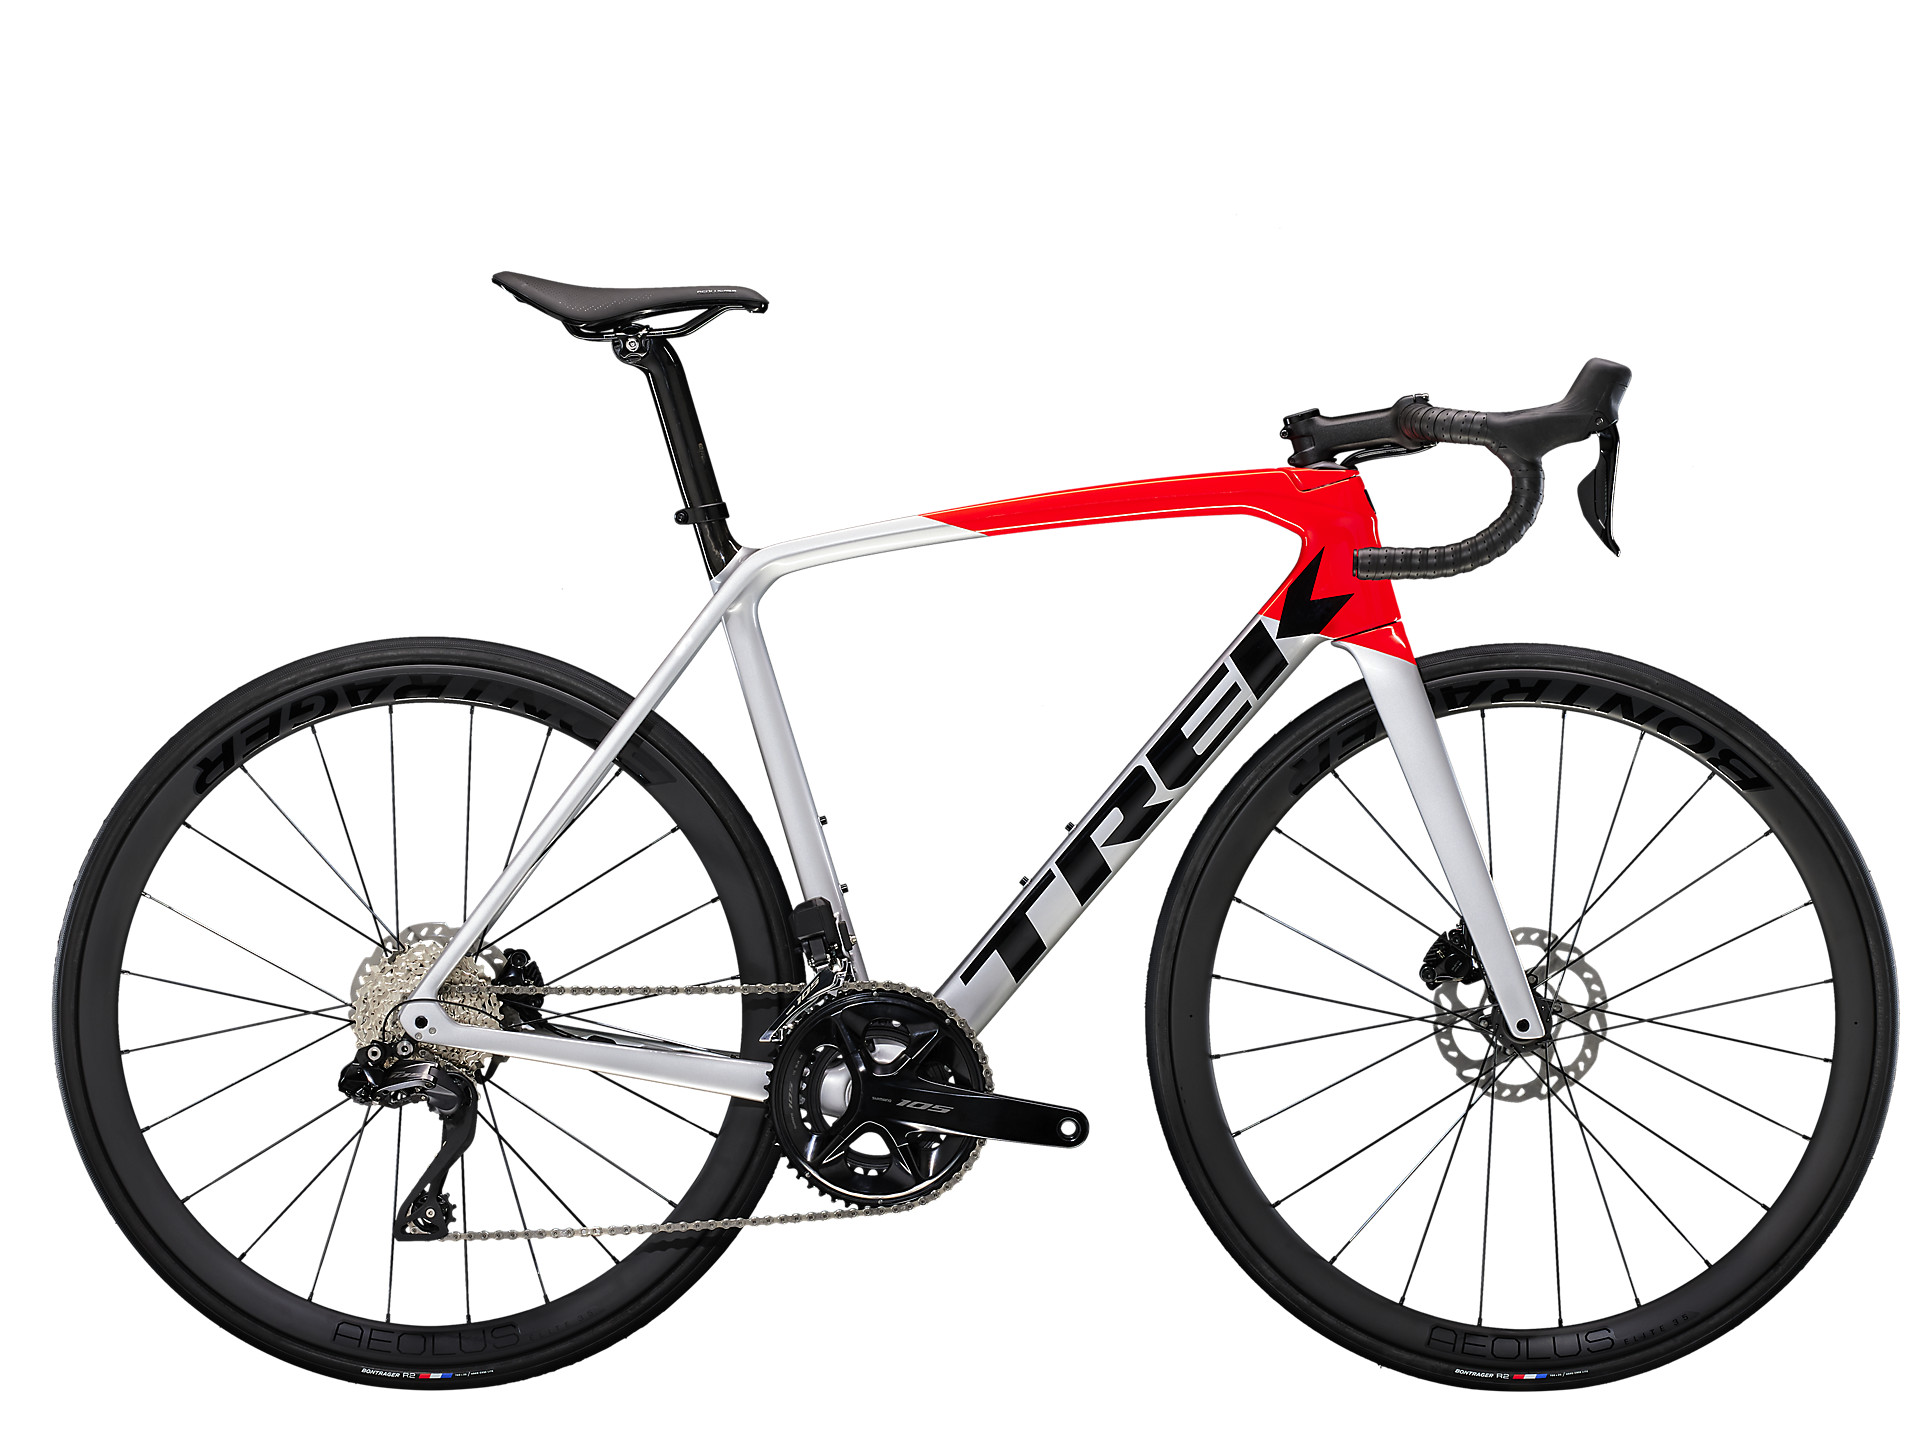 Silver/red Trek Émonda SL 6 Pro with Shimano 105 Di2 groupset and hydraulic disc brakes.